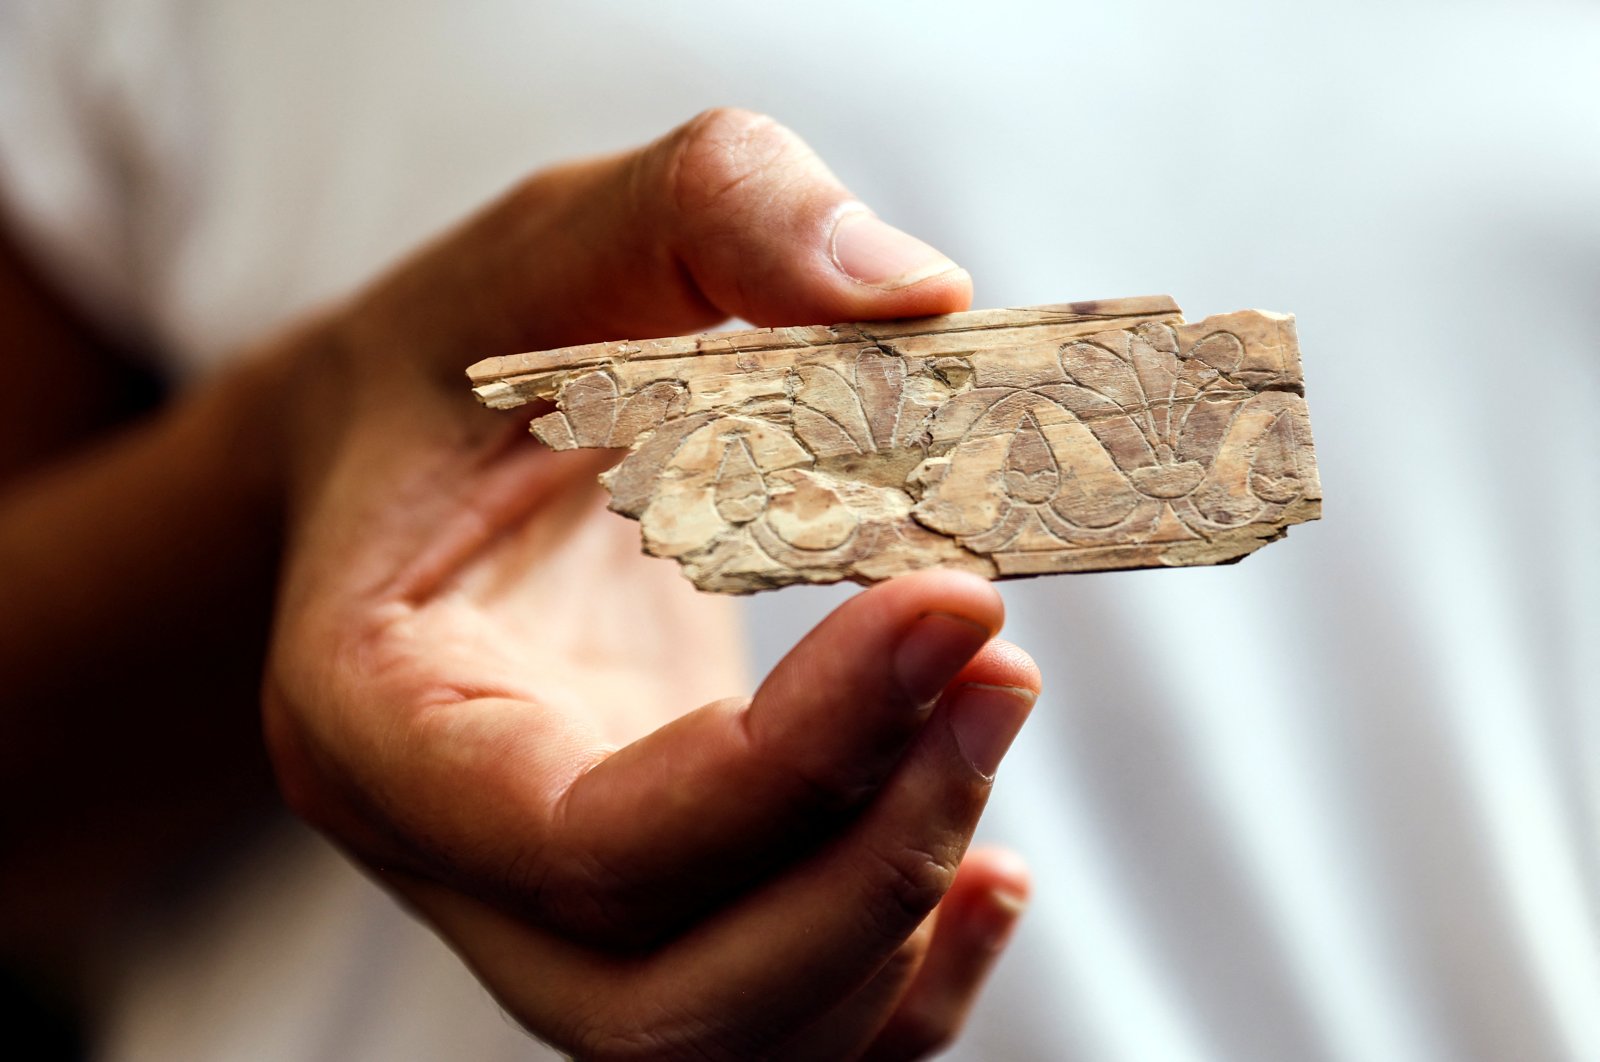 A worker holds an ivory plaque unearthed in excavations near the walls of Jerusalem&#039;s Old City, East Jerusalem, occupied Palestine, Sept. 5, 2022. (Reuters Photo)